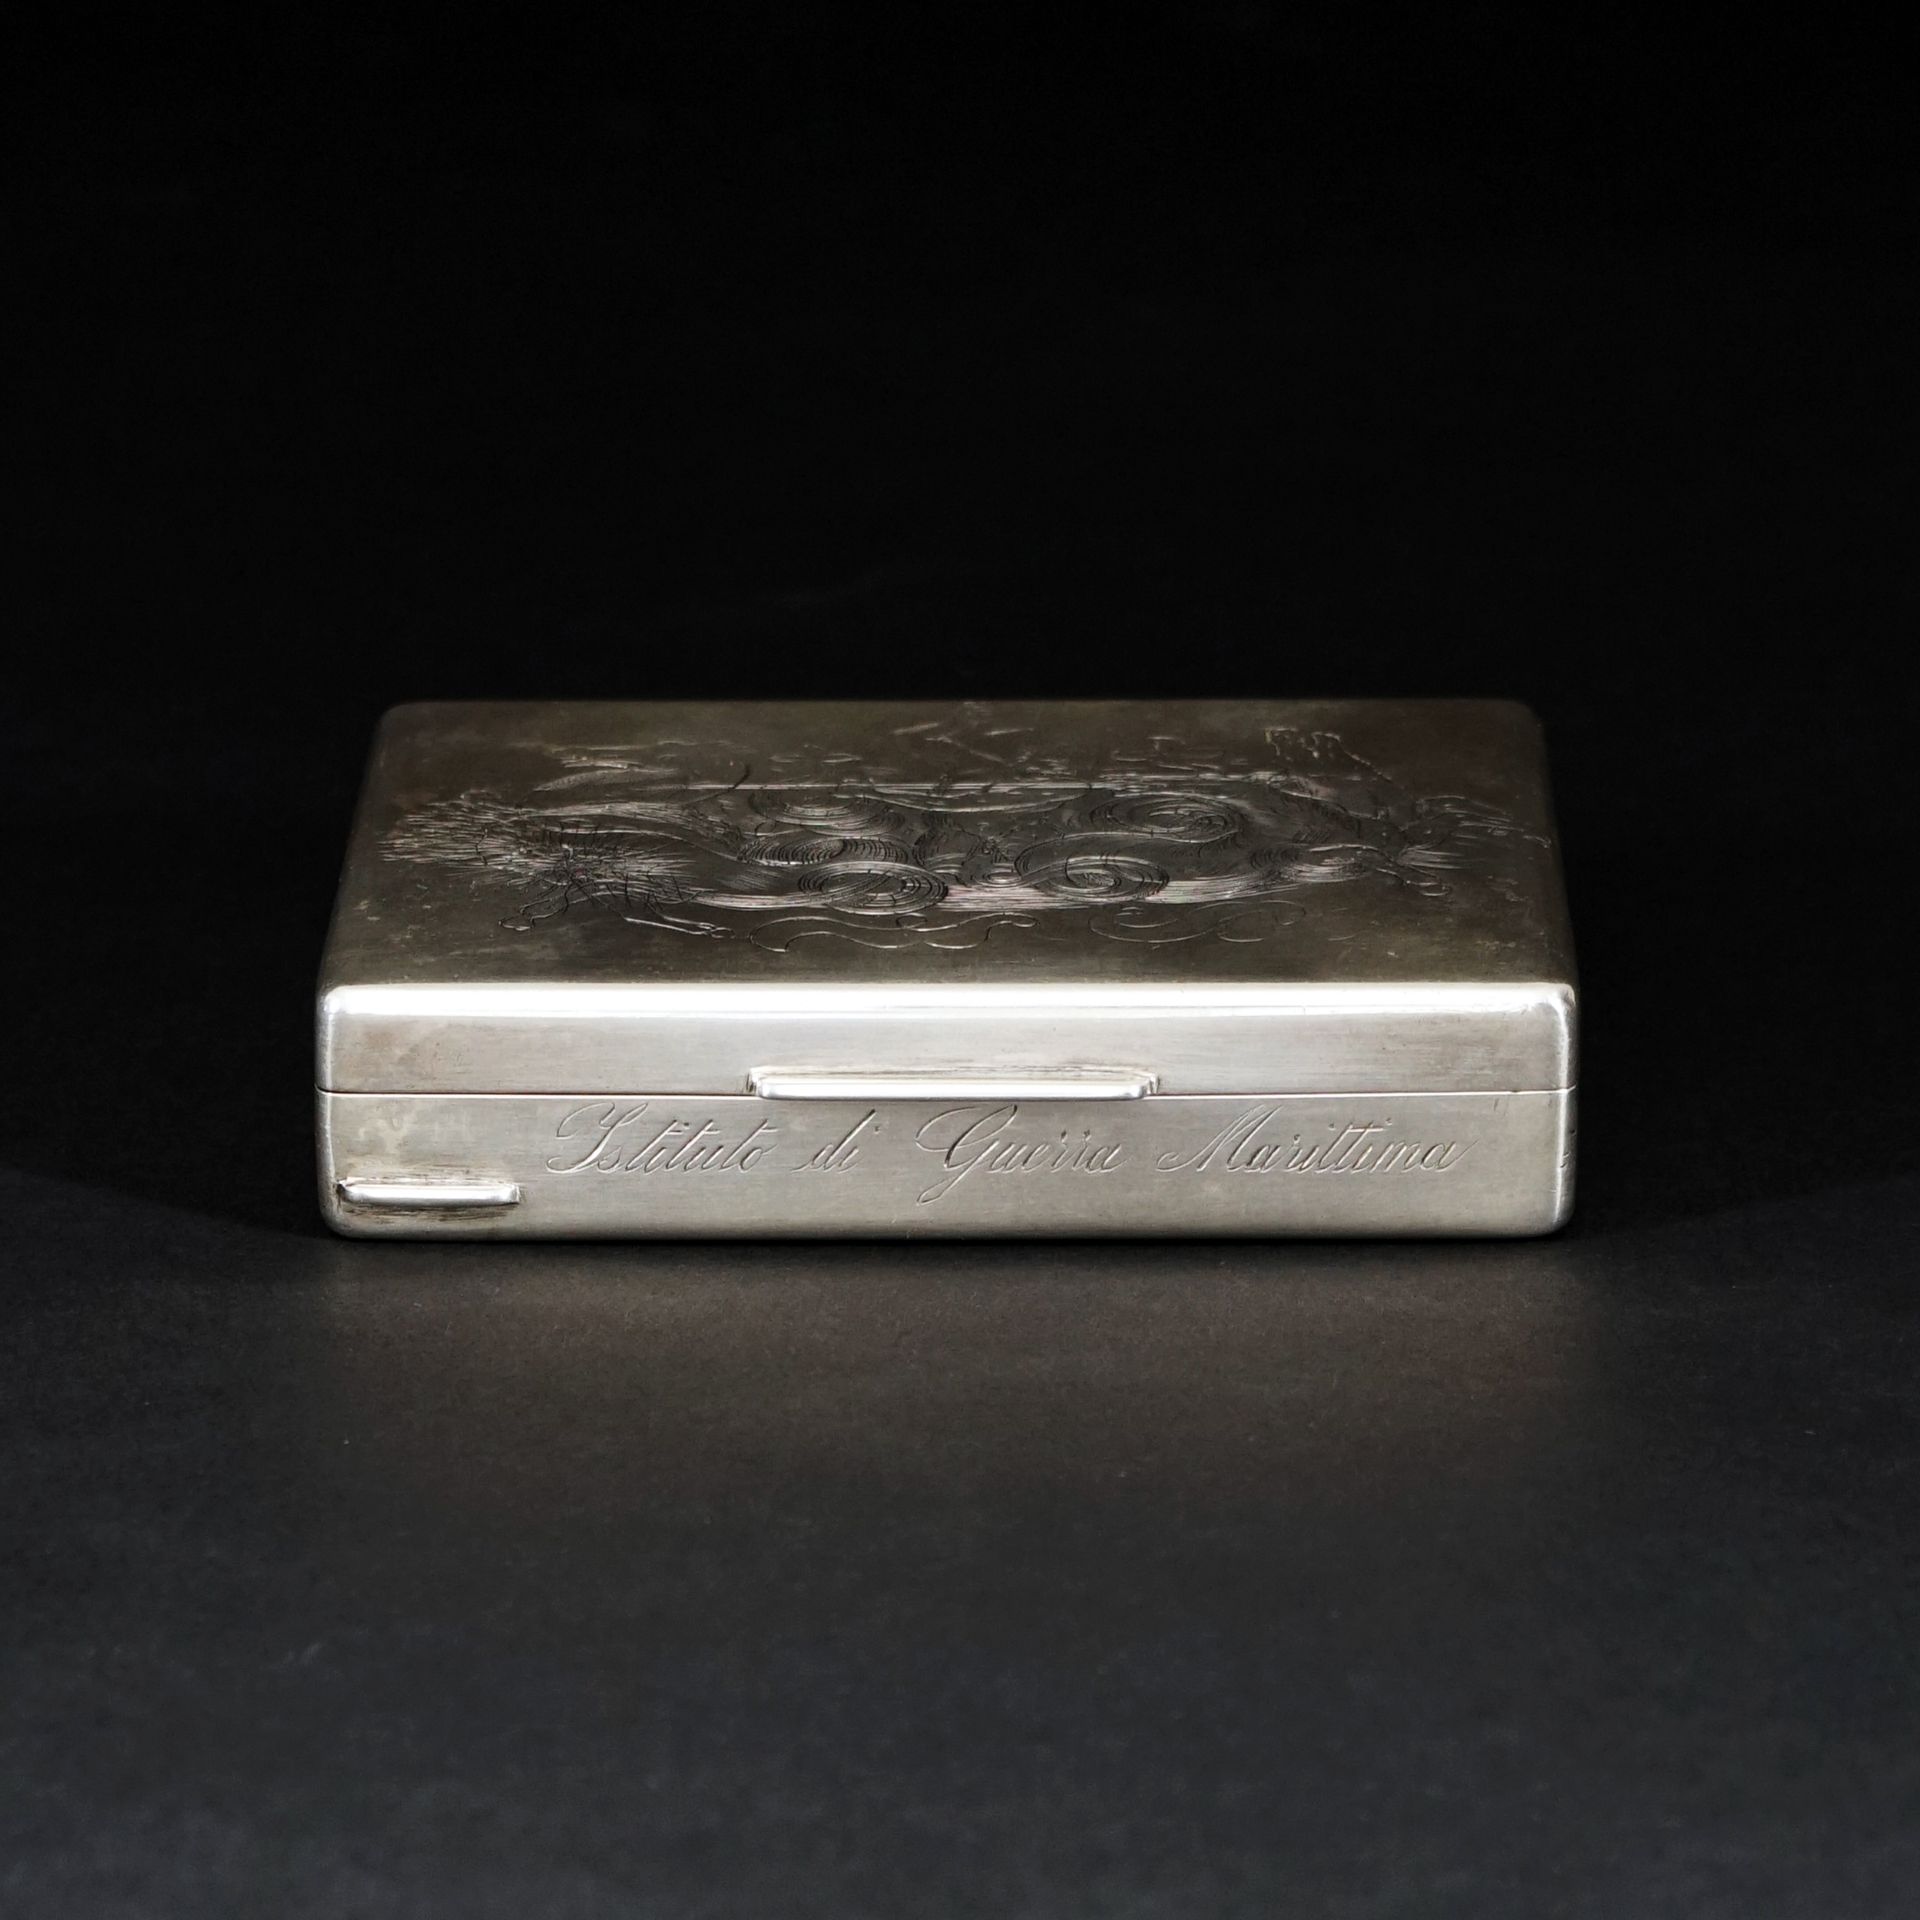 An Italian engraved sterling silver rectangular box, Florence, Gino Piani, 1935-1945 8,5by11cm., - Image 2 of 2